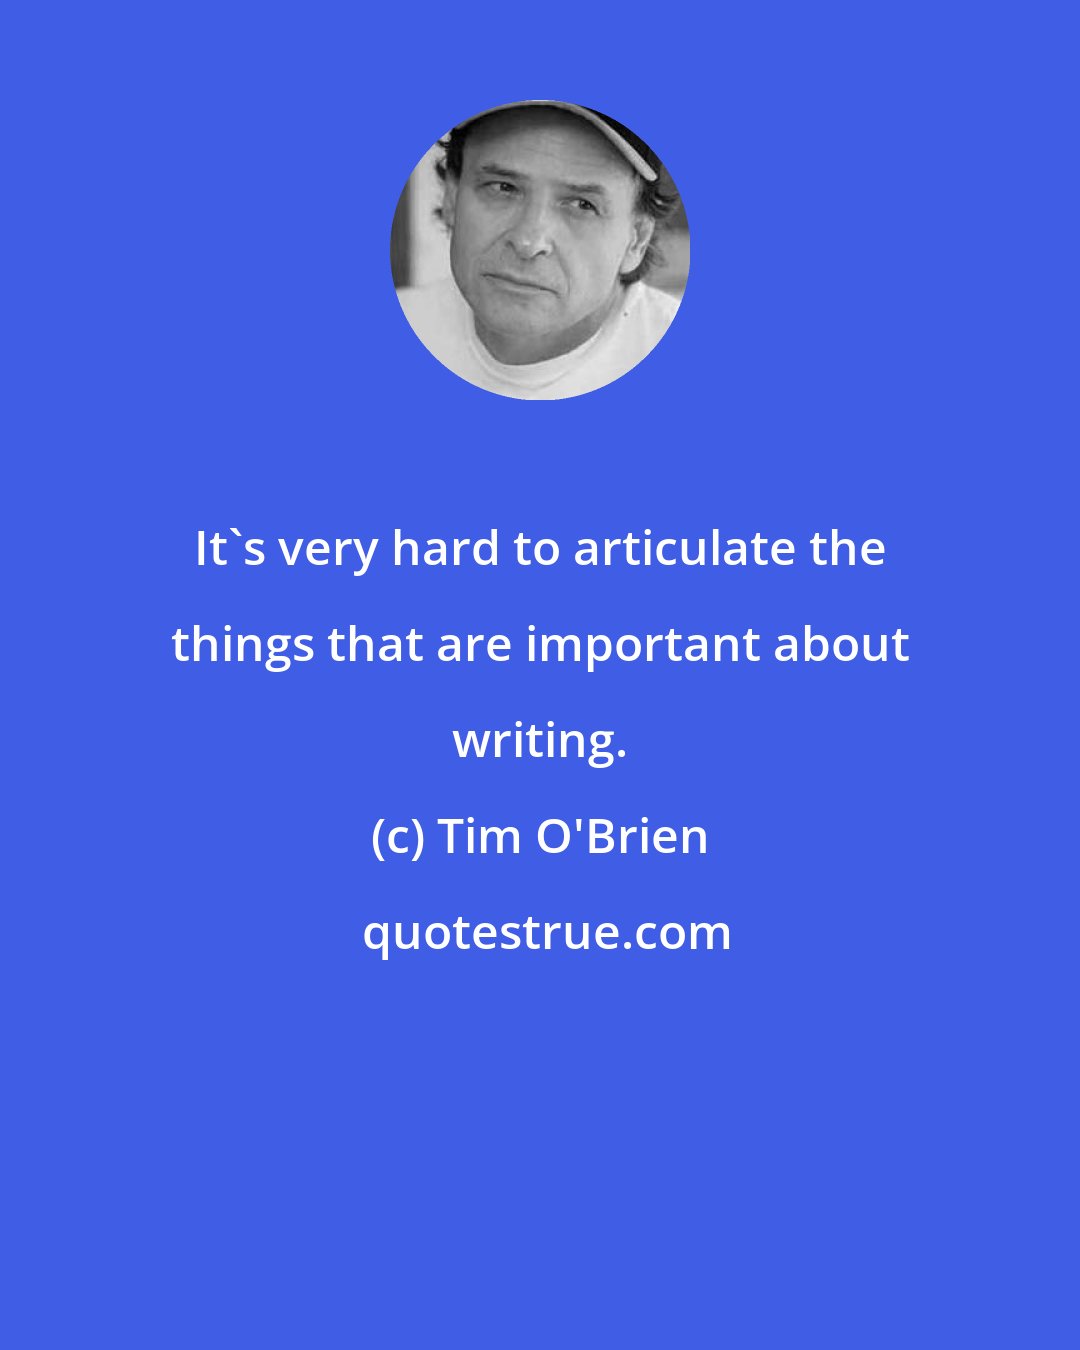 Tim O'Brien: It's very hard to articulate the things that are important about writing.